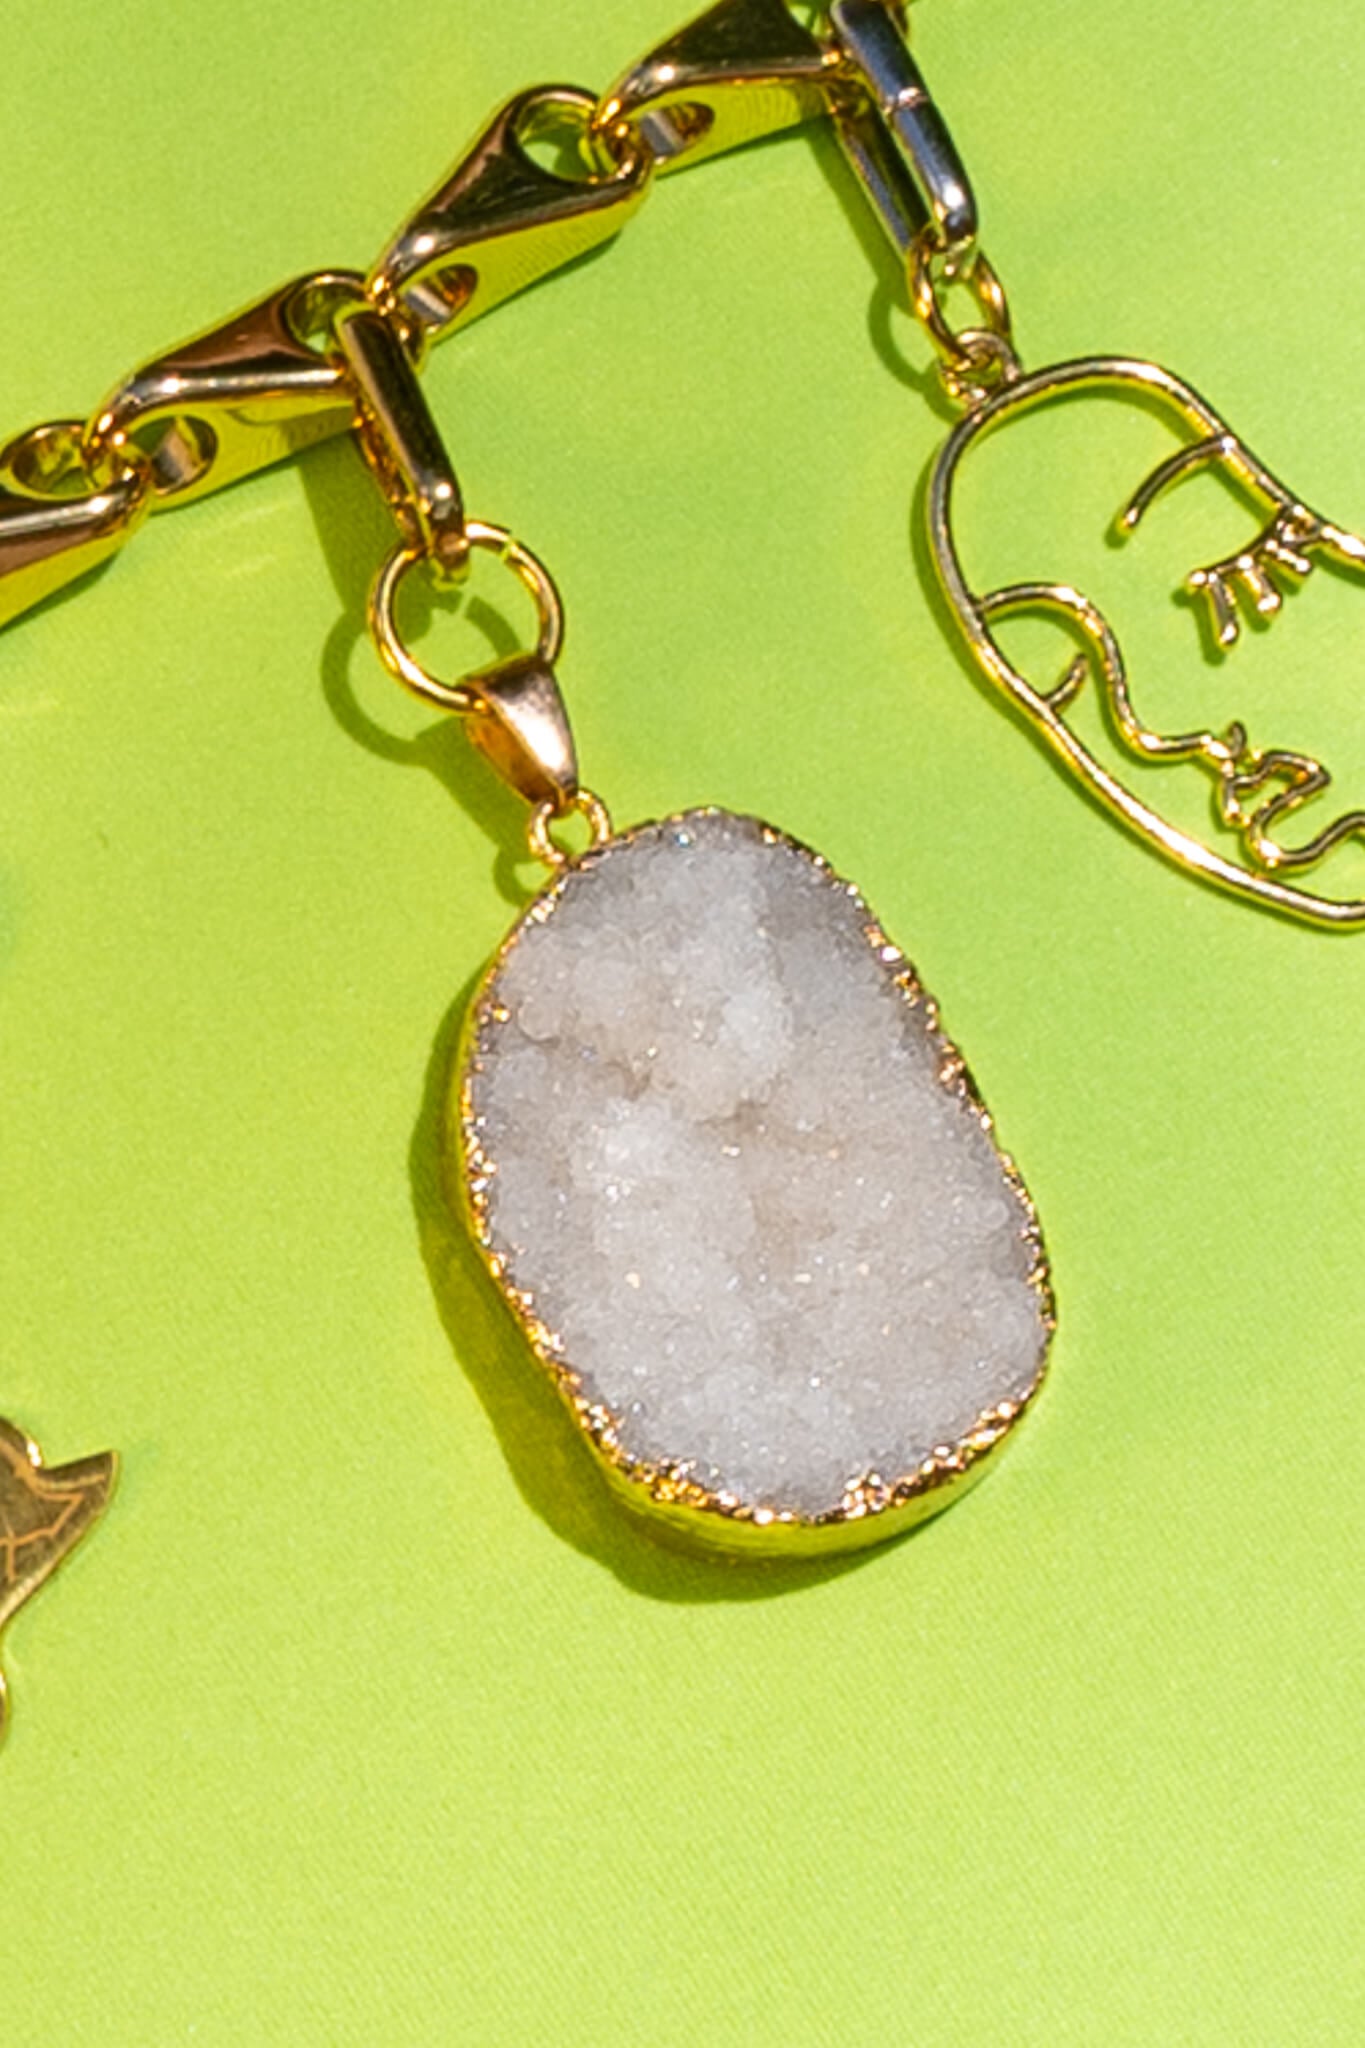 White stone charm clipped on a chain belt